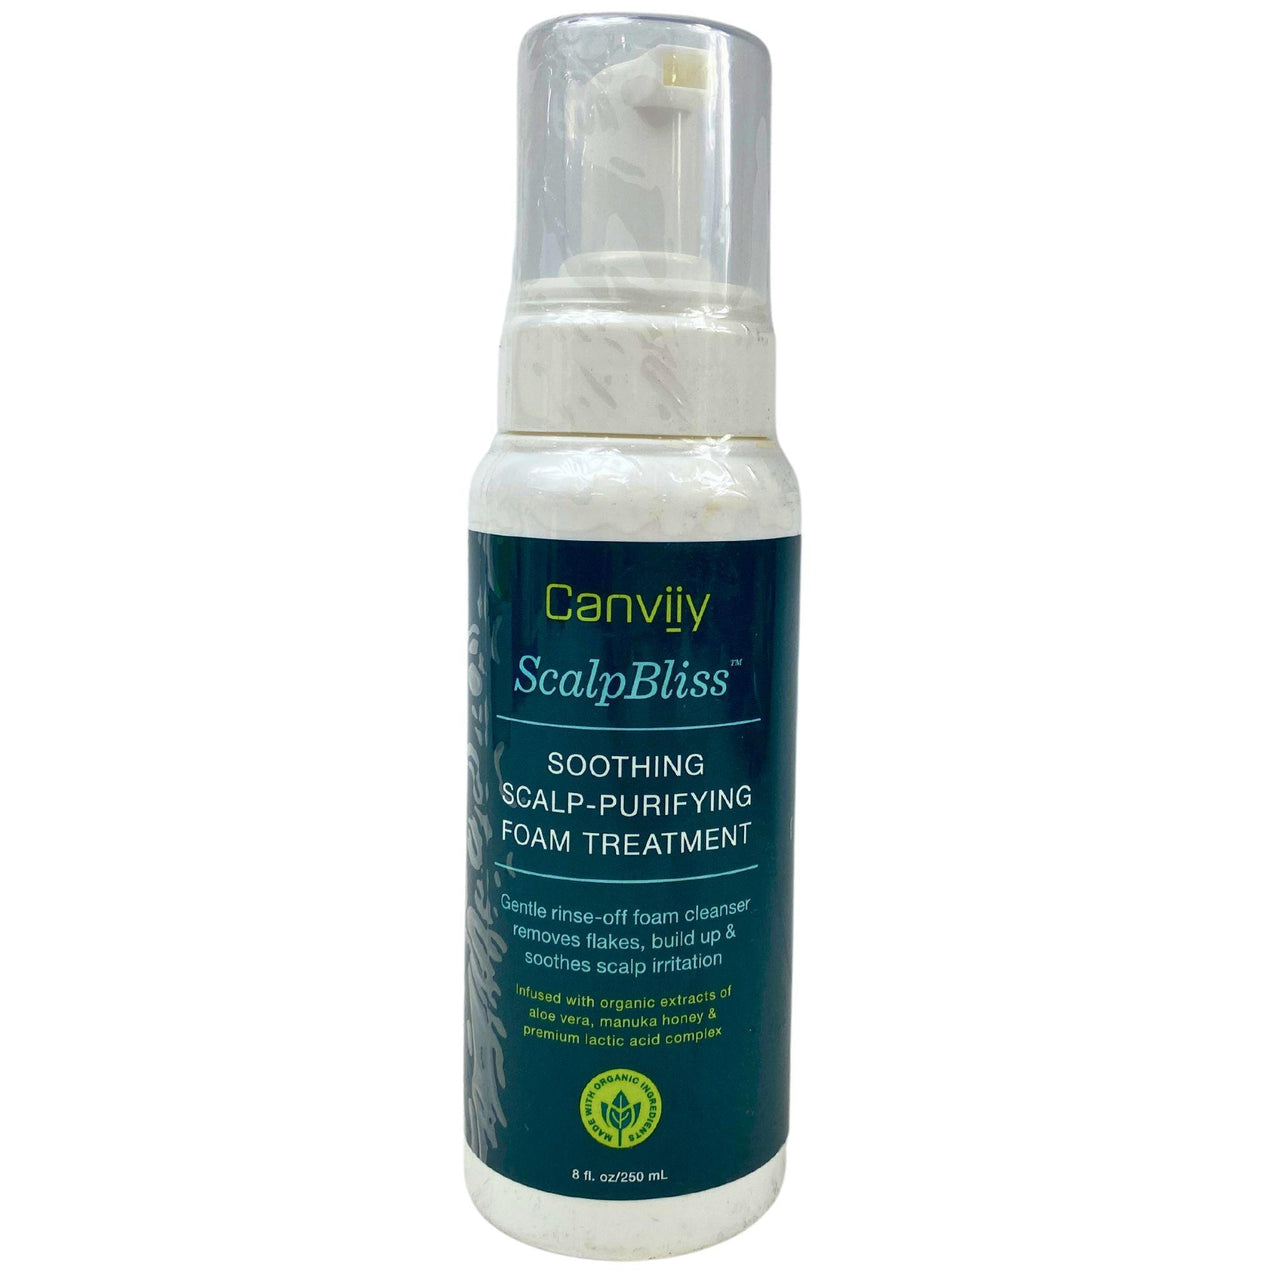 Canviiy ScalpBliss Soothing Scalp-Purifying Foam Treatment Gentle rinse-off 8OZ (23 Pcs Lot) - Discount Wholesalers Inc